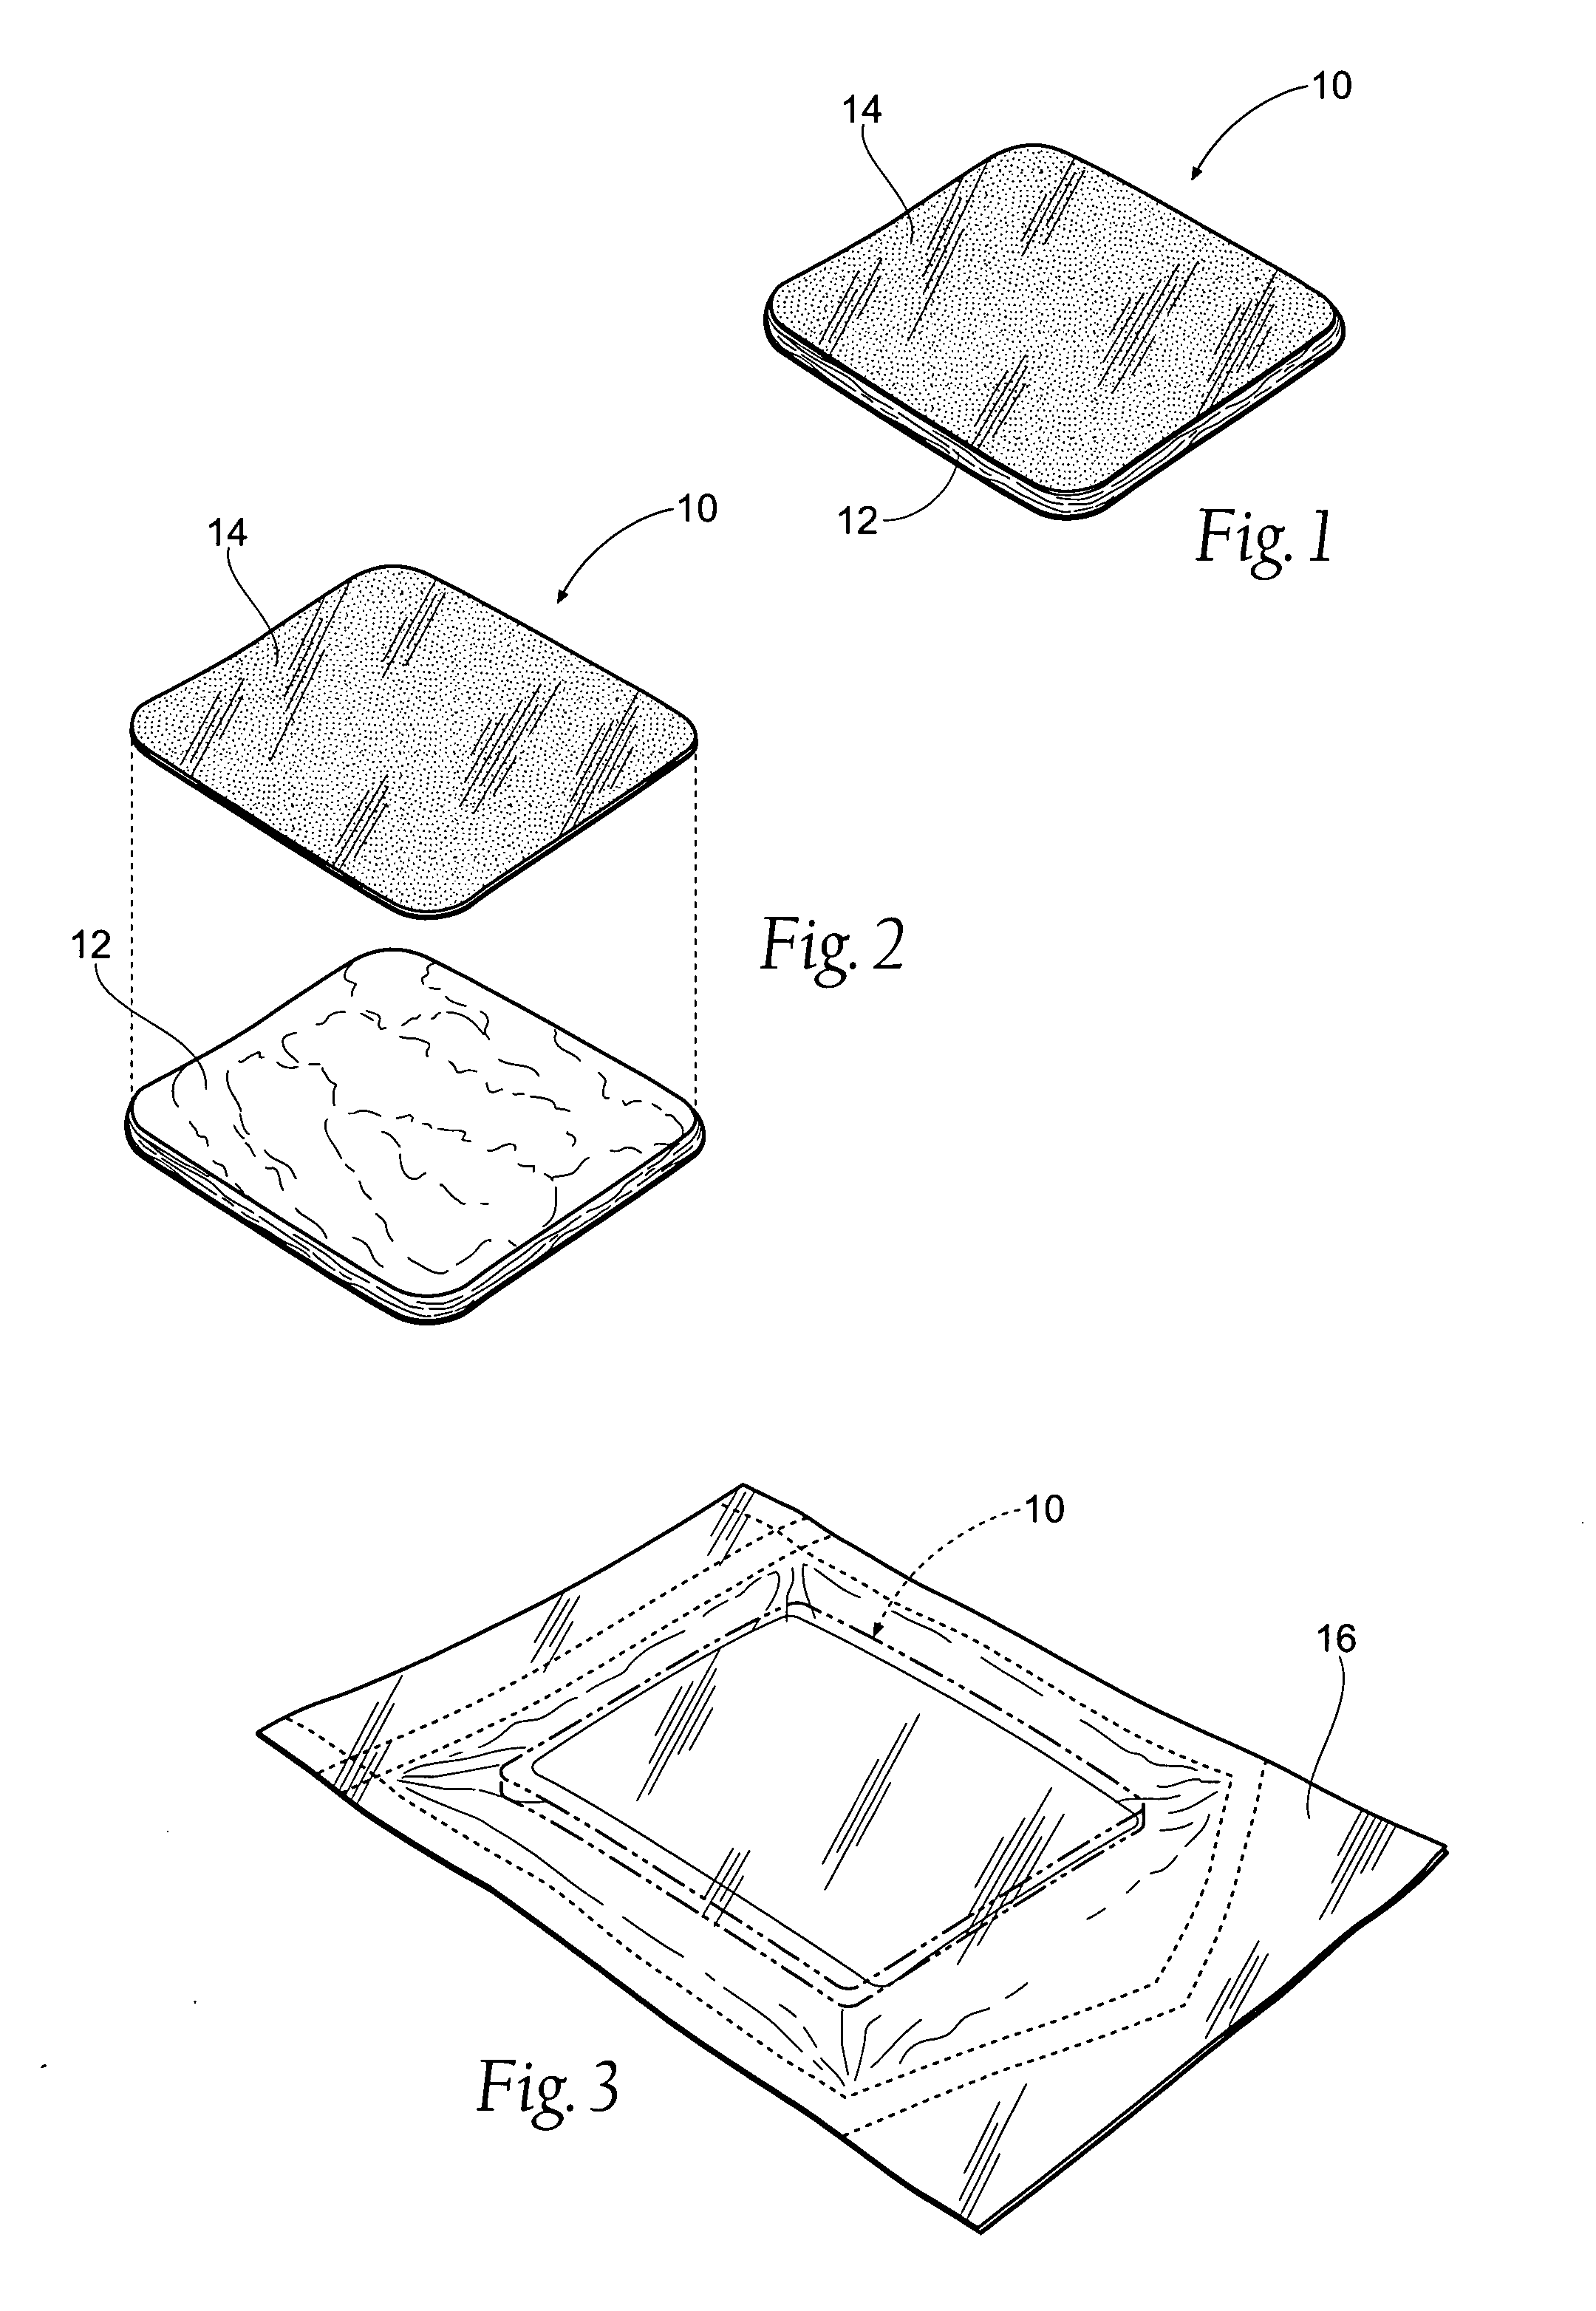 Antimicrobial barriers, systems, and methods formed from hydrophilic polymer structures such as chistosan